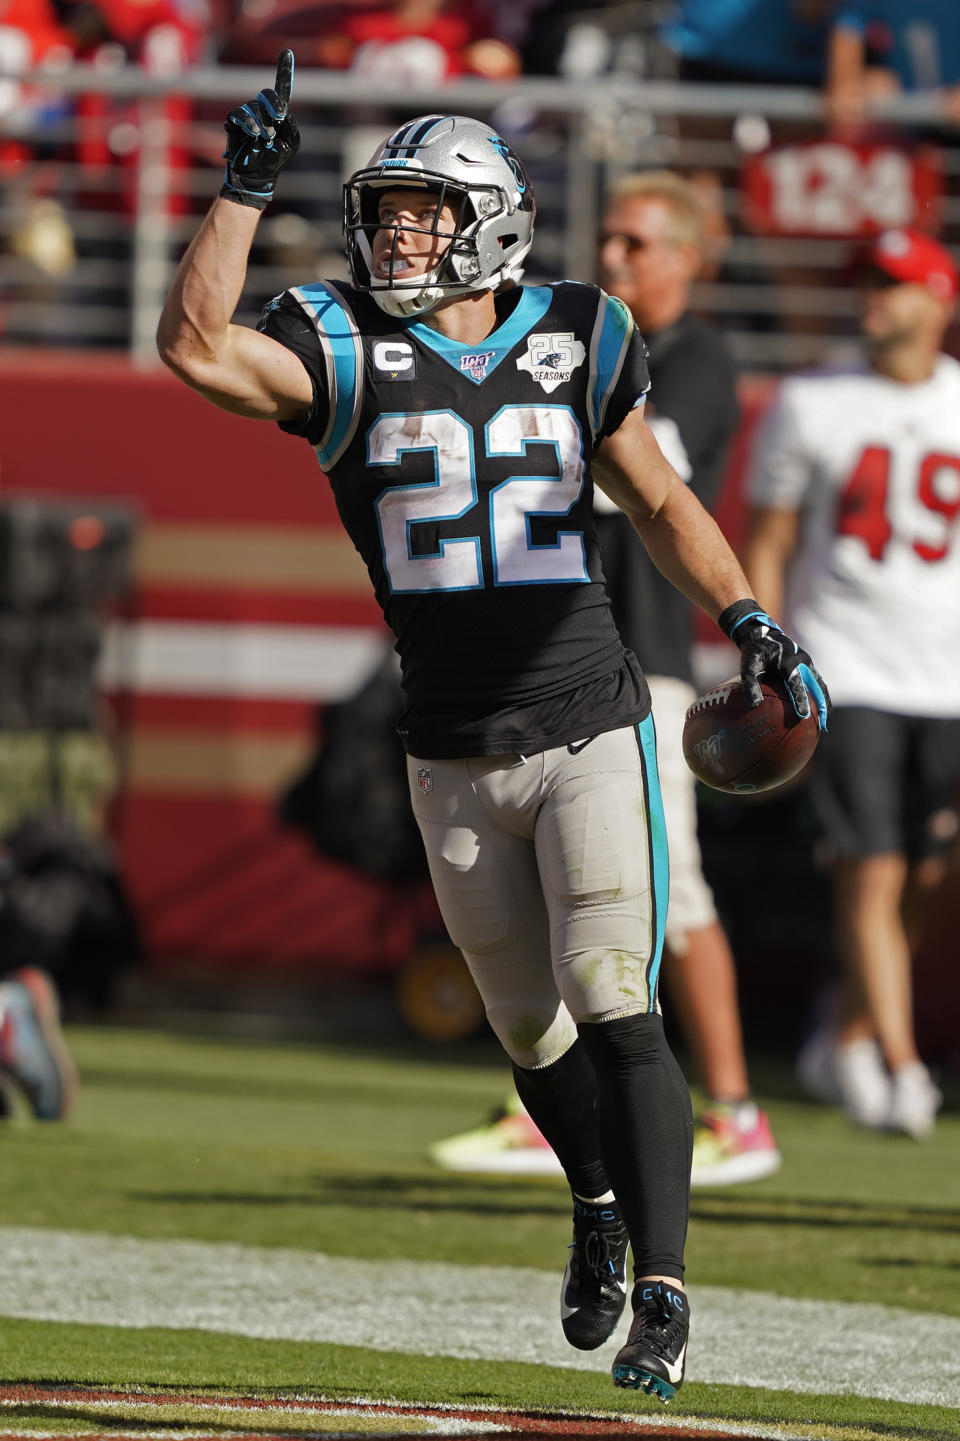 Carolina Panthers running back Christian McCaffrey celebrates after scoring a touchdown against the San Francisco 49ers during the second half of an NFL football game in Santa Clara, Calif., Sunday, Oct. 27, 2019. (AP Photo/Tony Avelar)